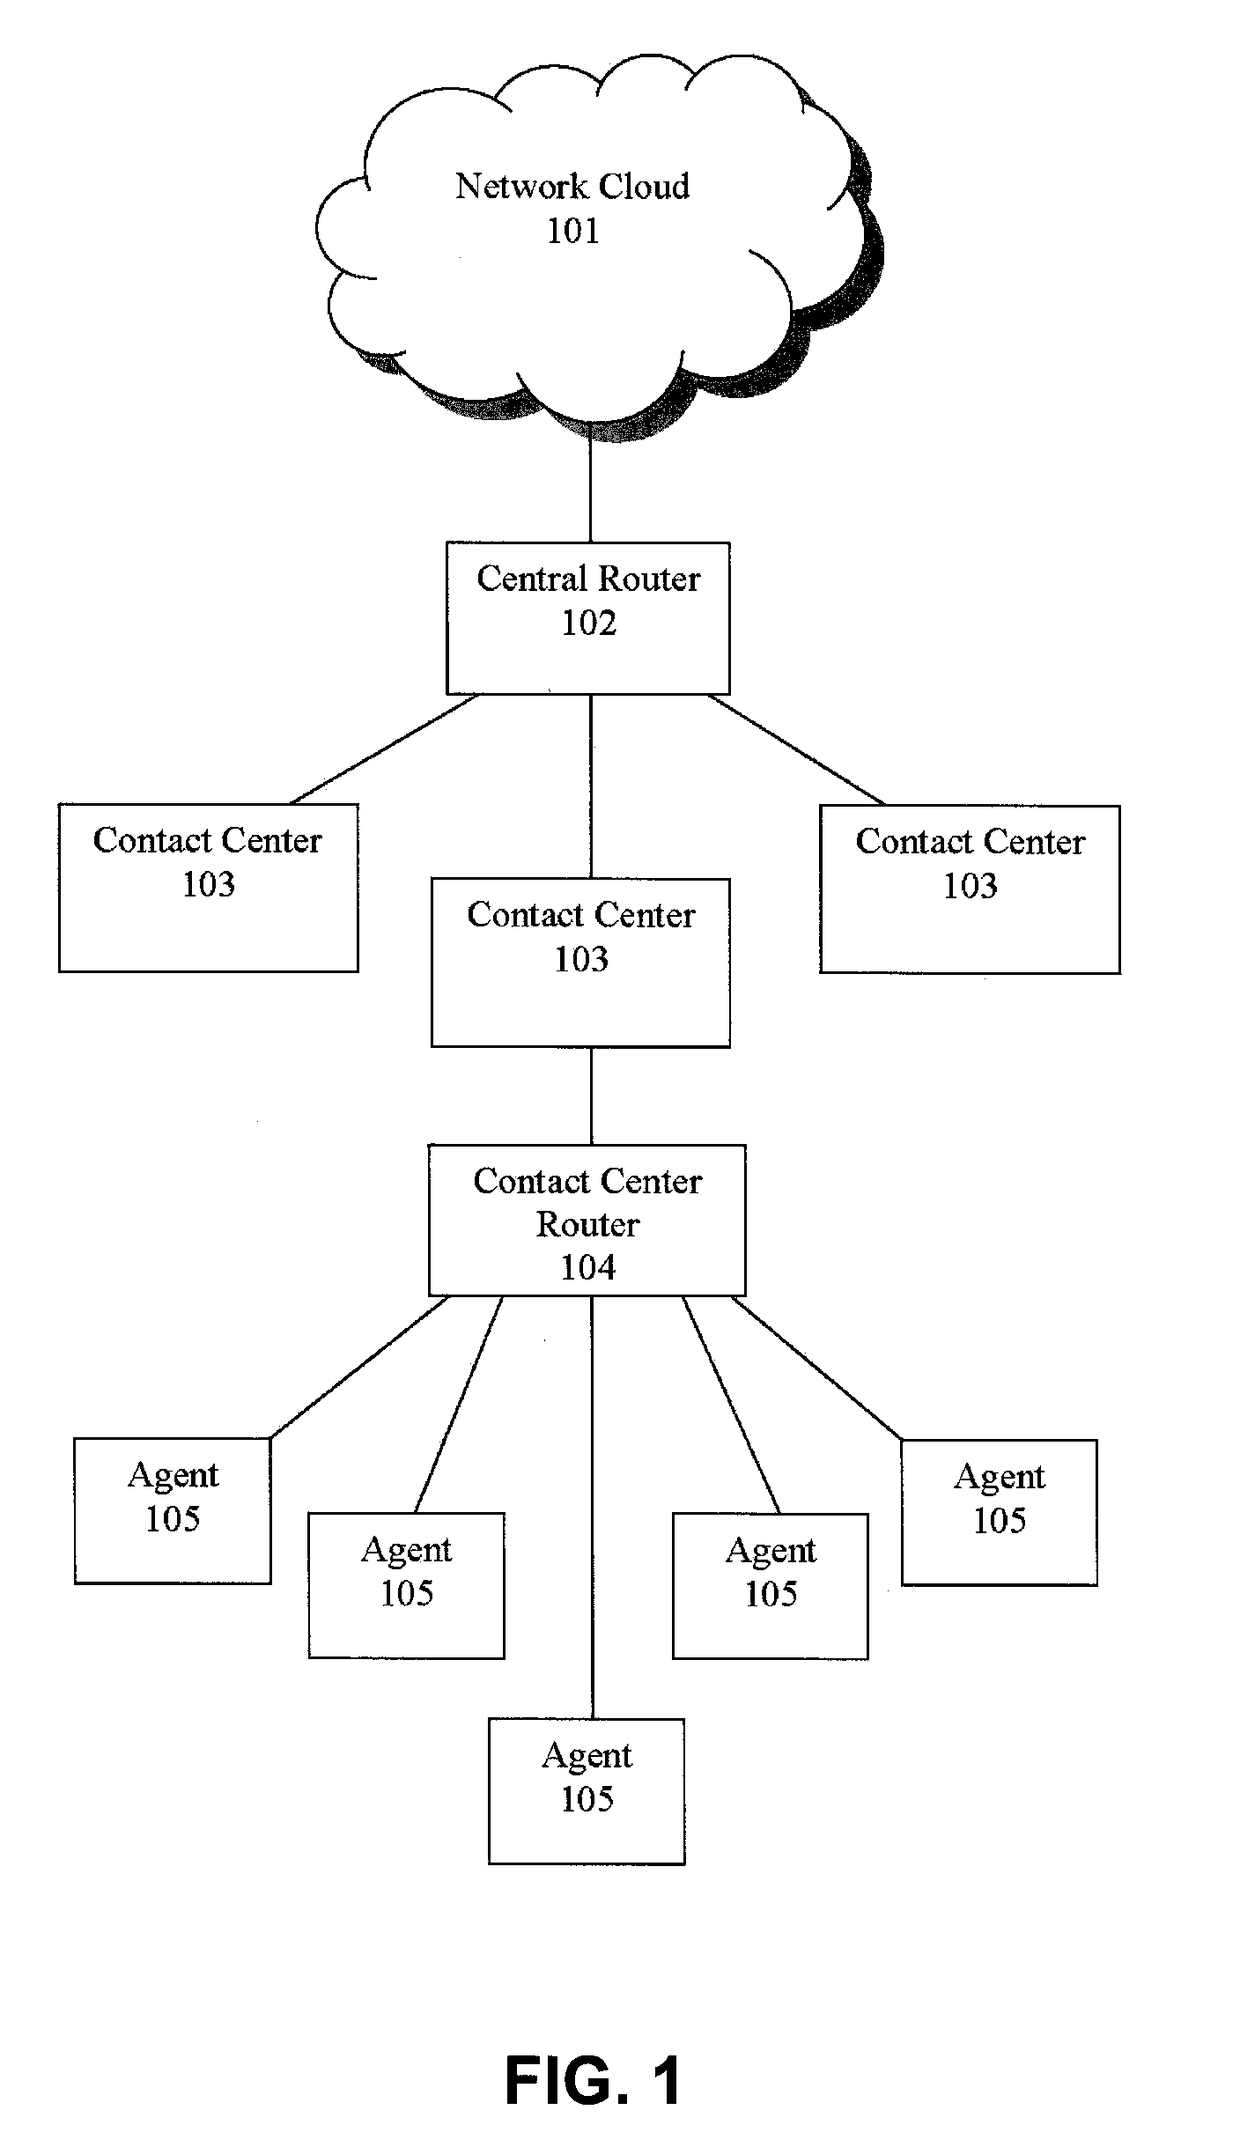 Balancing multiple computer models in a call center routing system